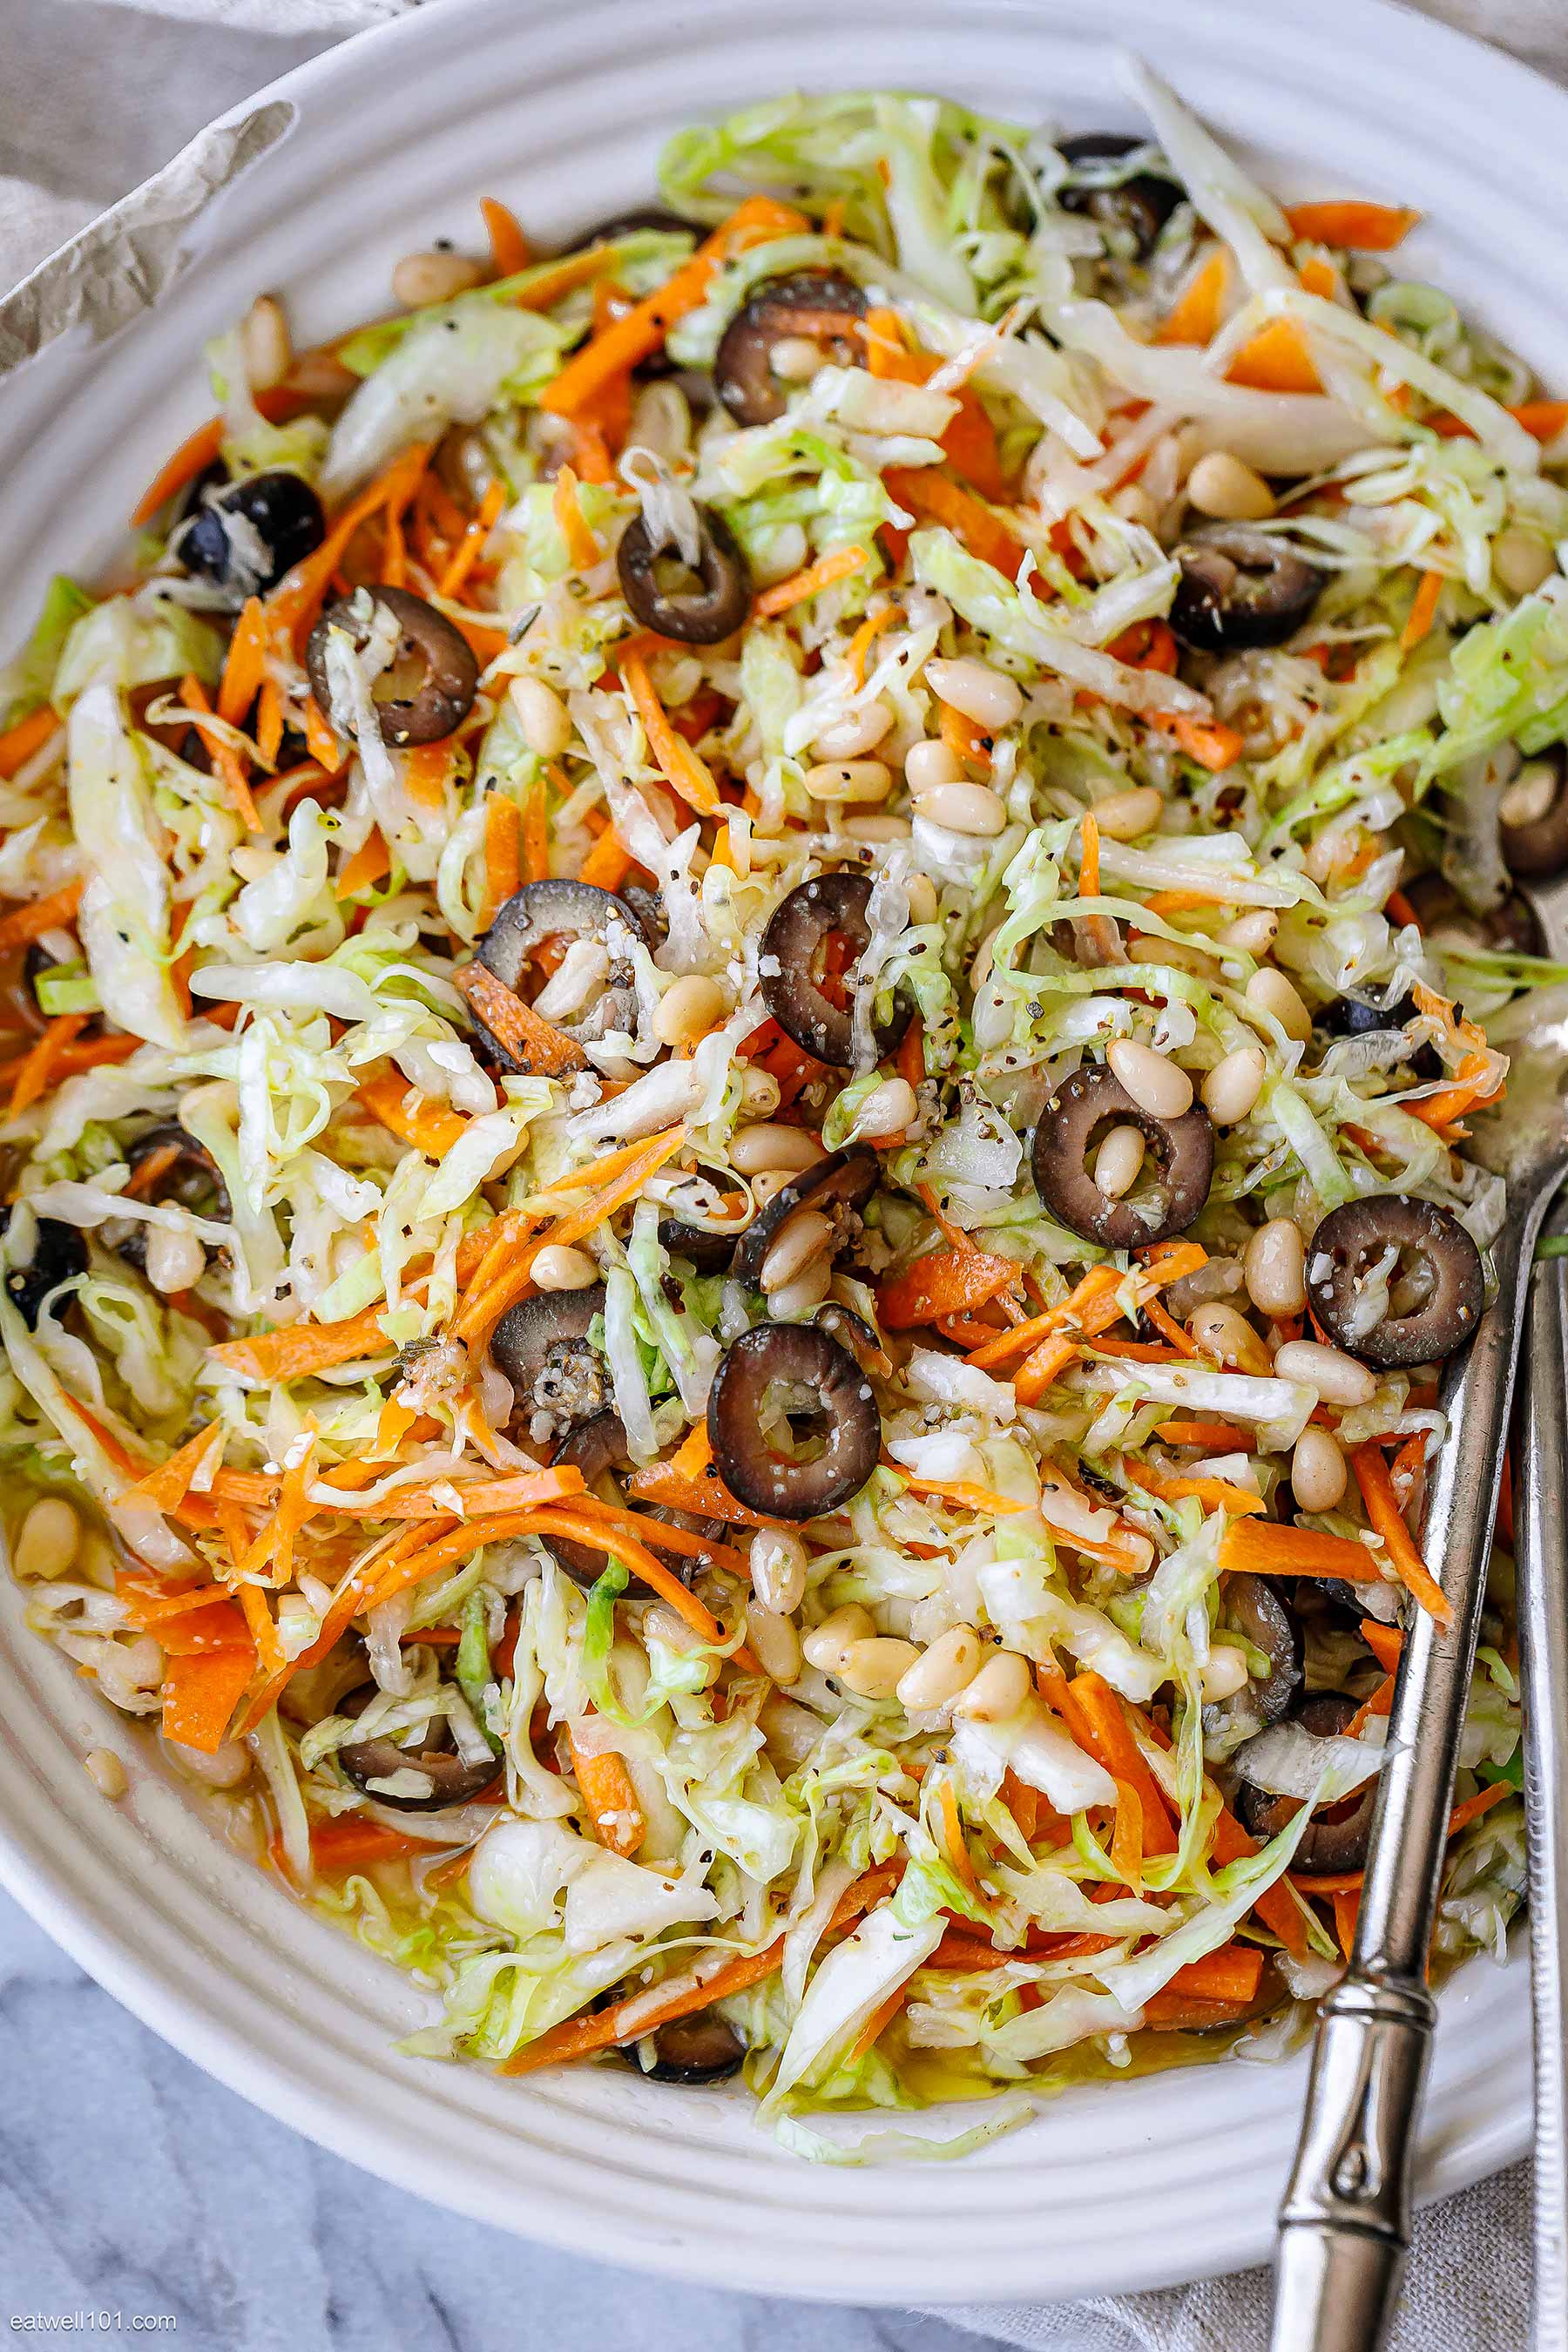 Tips for making healthy coleslaw